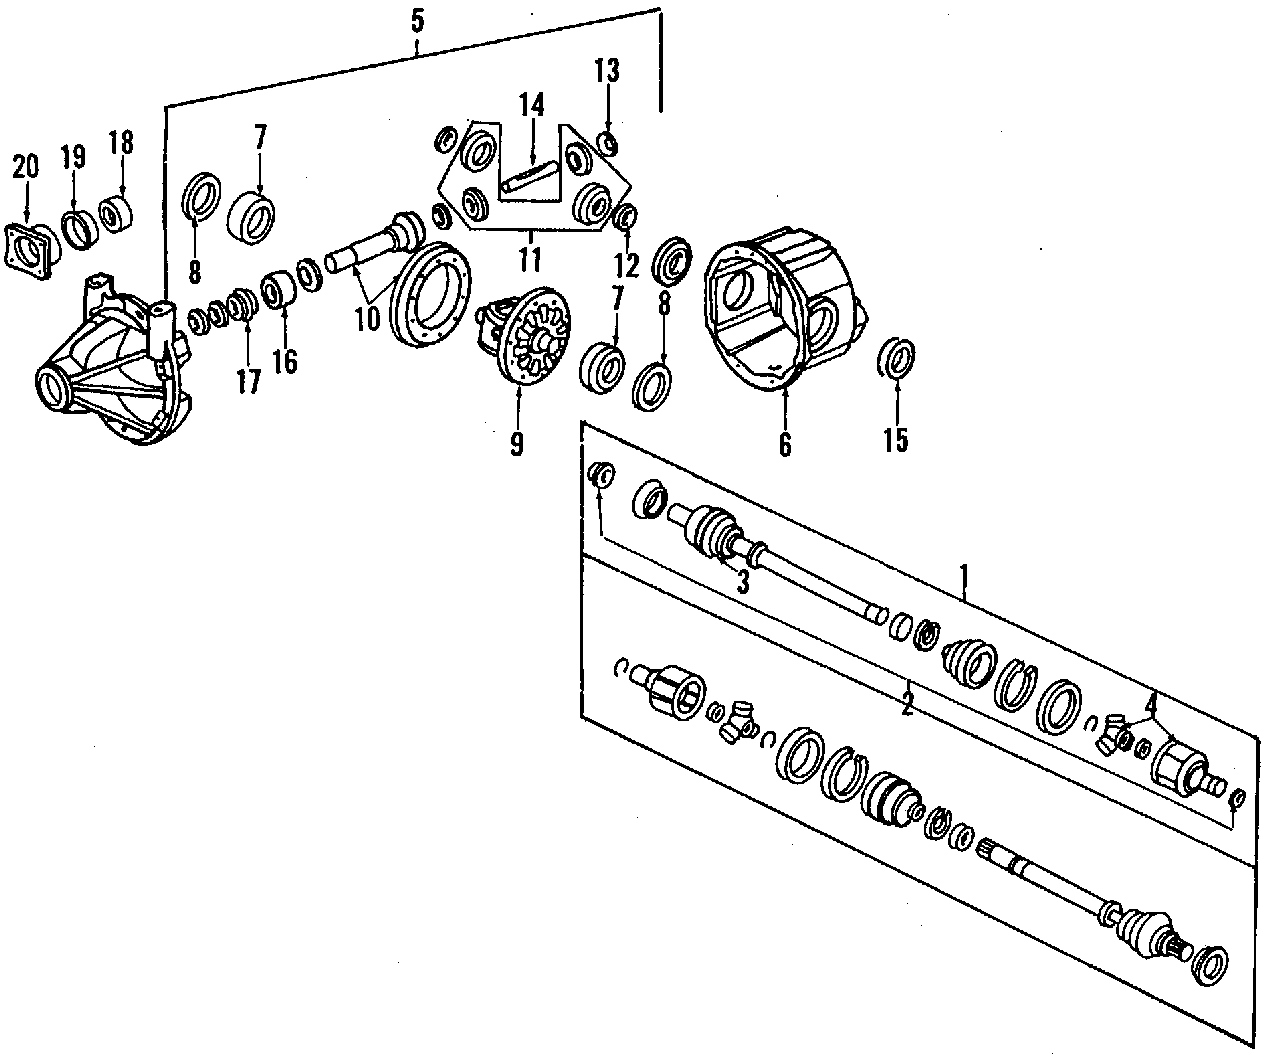 6REAR AXLE. AXLE SHAFTS & JOINTS. DIFFERENTIAL. PROPELLER SHAFT.https://images.simplepart.com/images/parts/motor/fullsize/F640360.png